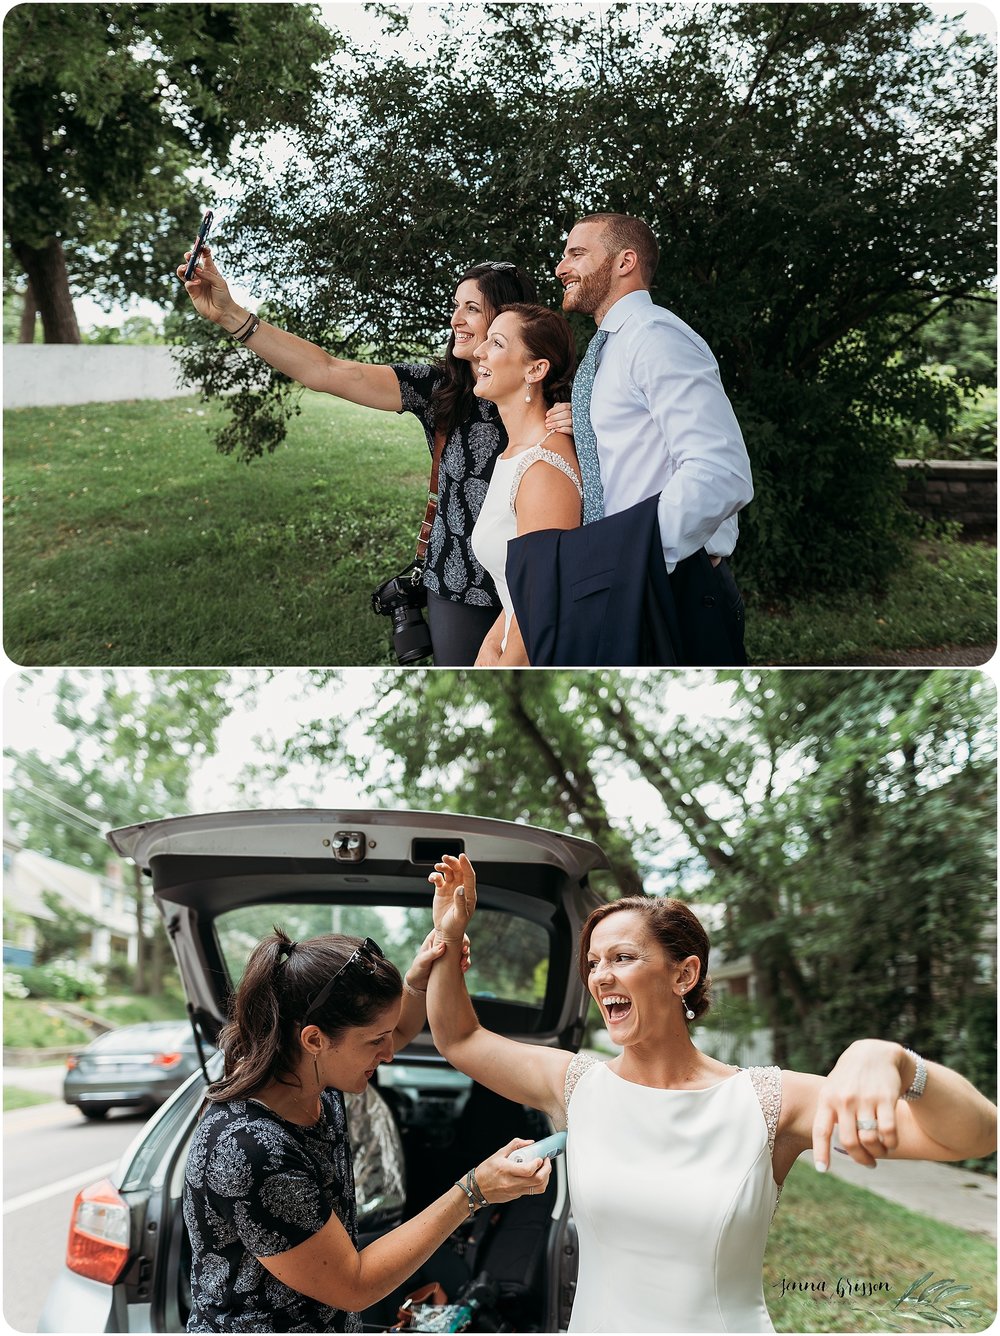 Selfie With The Bride And Groom -- And Me Coming In Handy With Some Last Minute Deo Help! Thanks To Arielle Thomas For The Photos &Amp;Lt;3